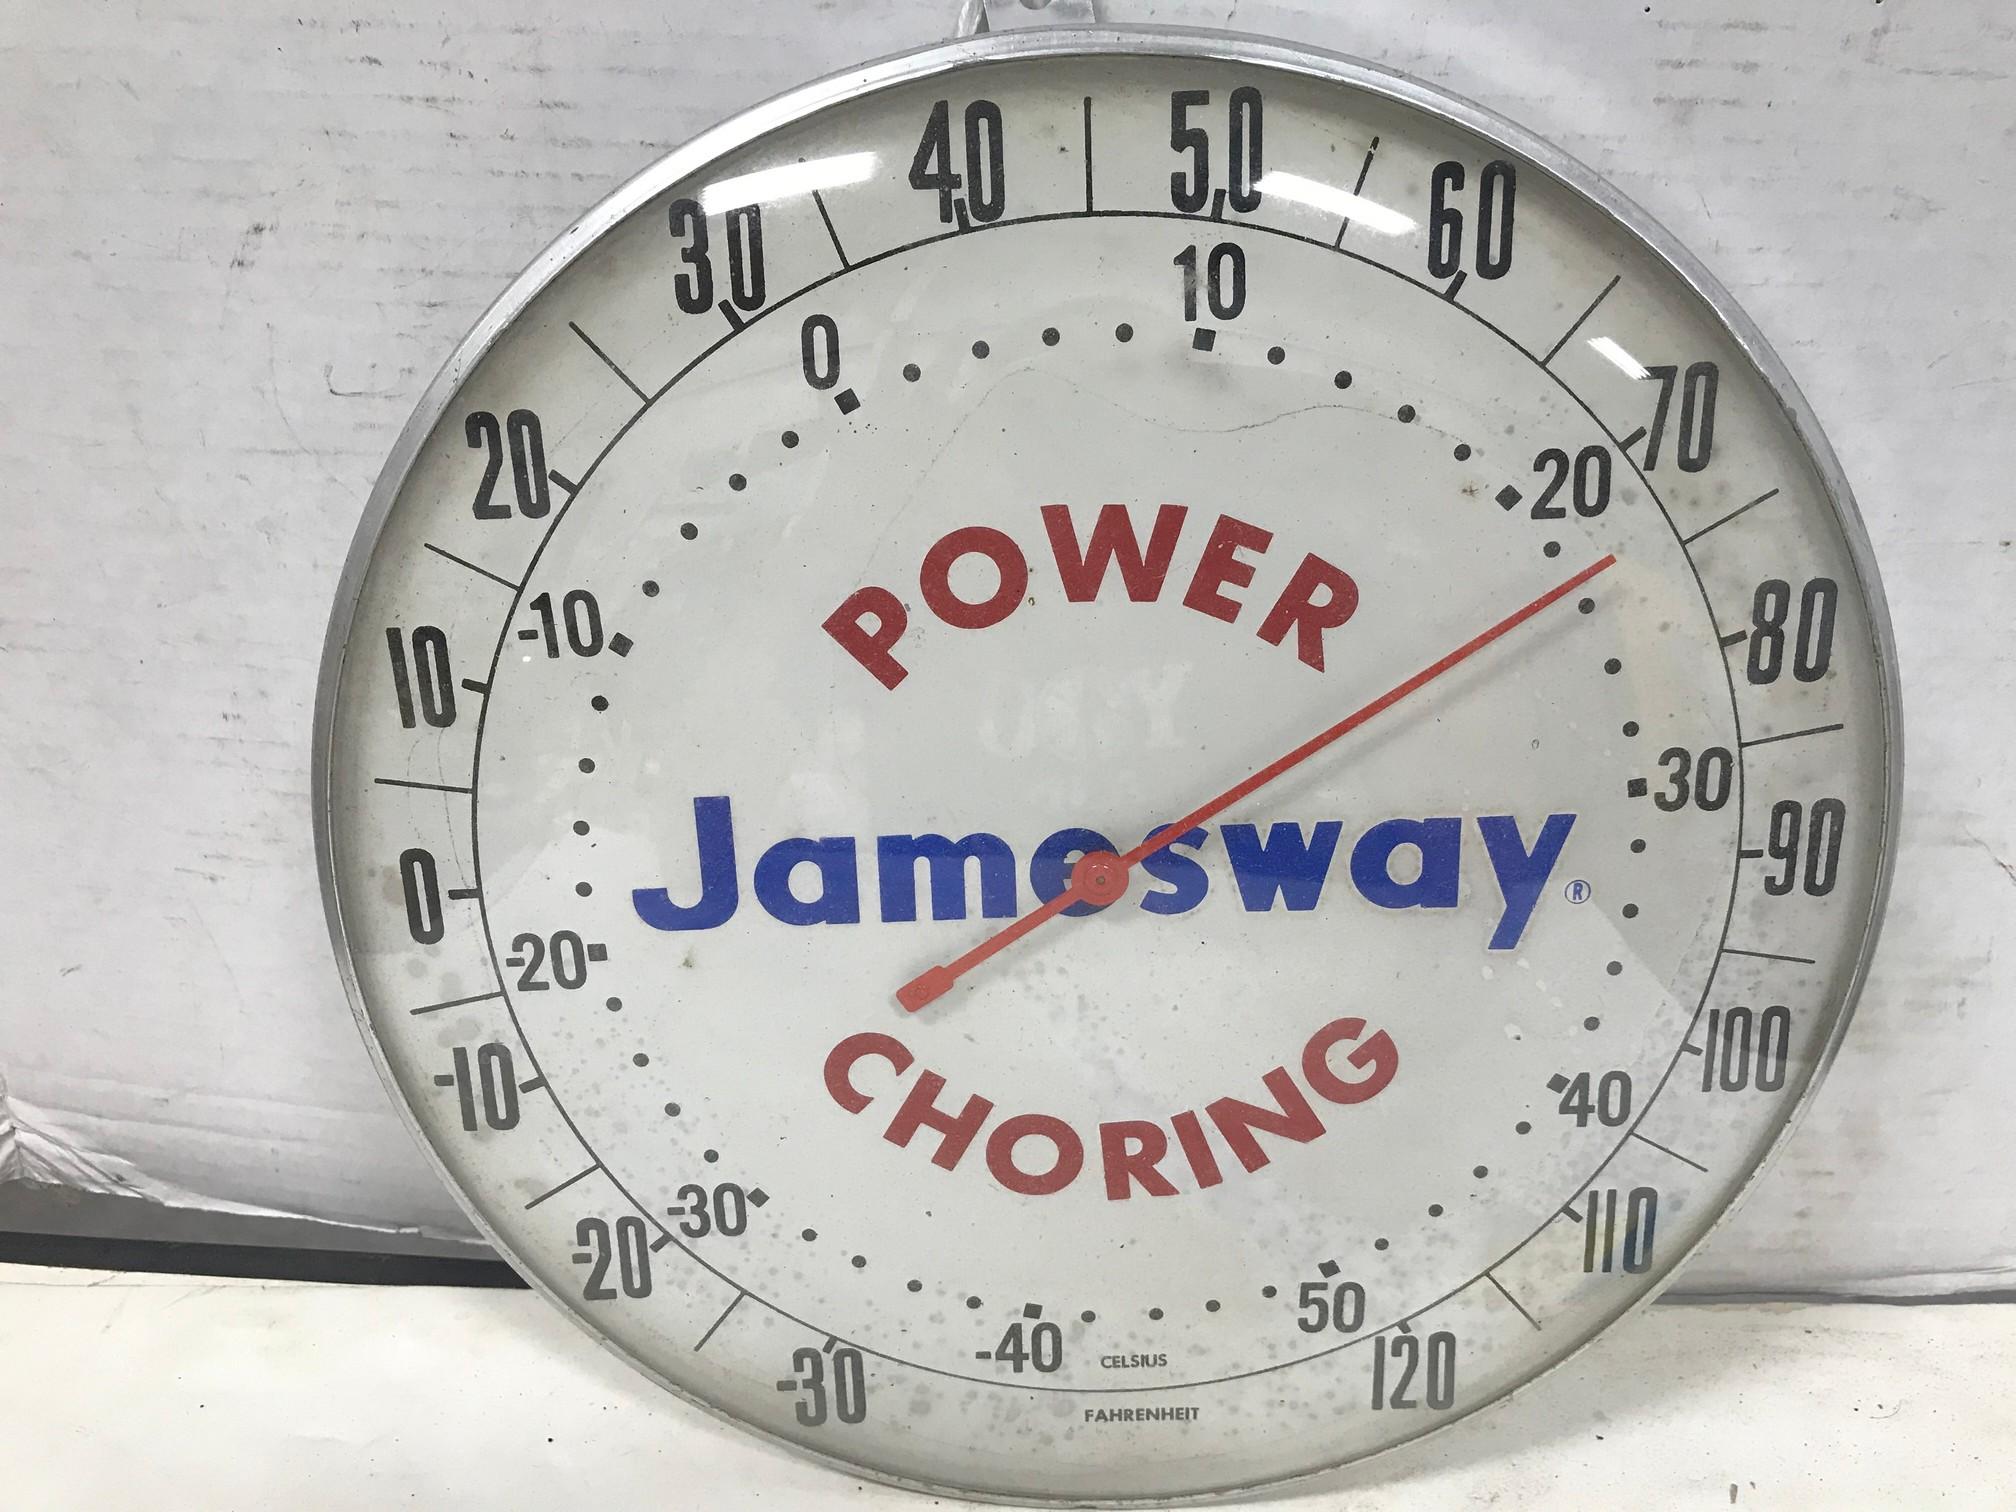 JAMESWAY POWER CHORING 12" ROUND OUTDOOR THERMOMETER